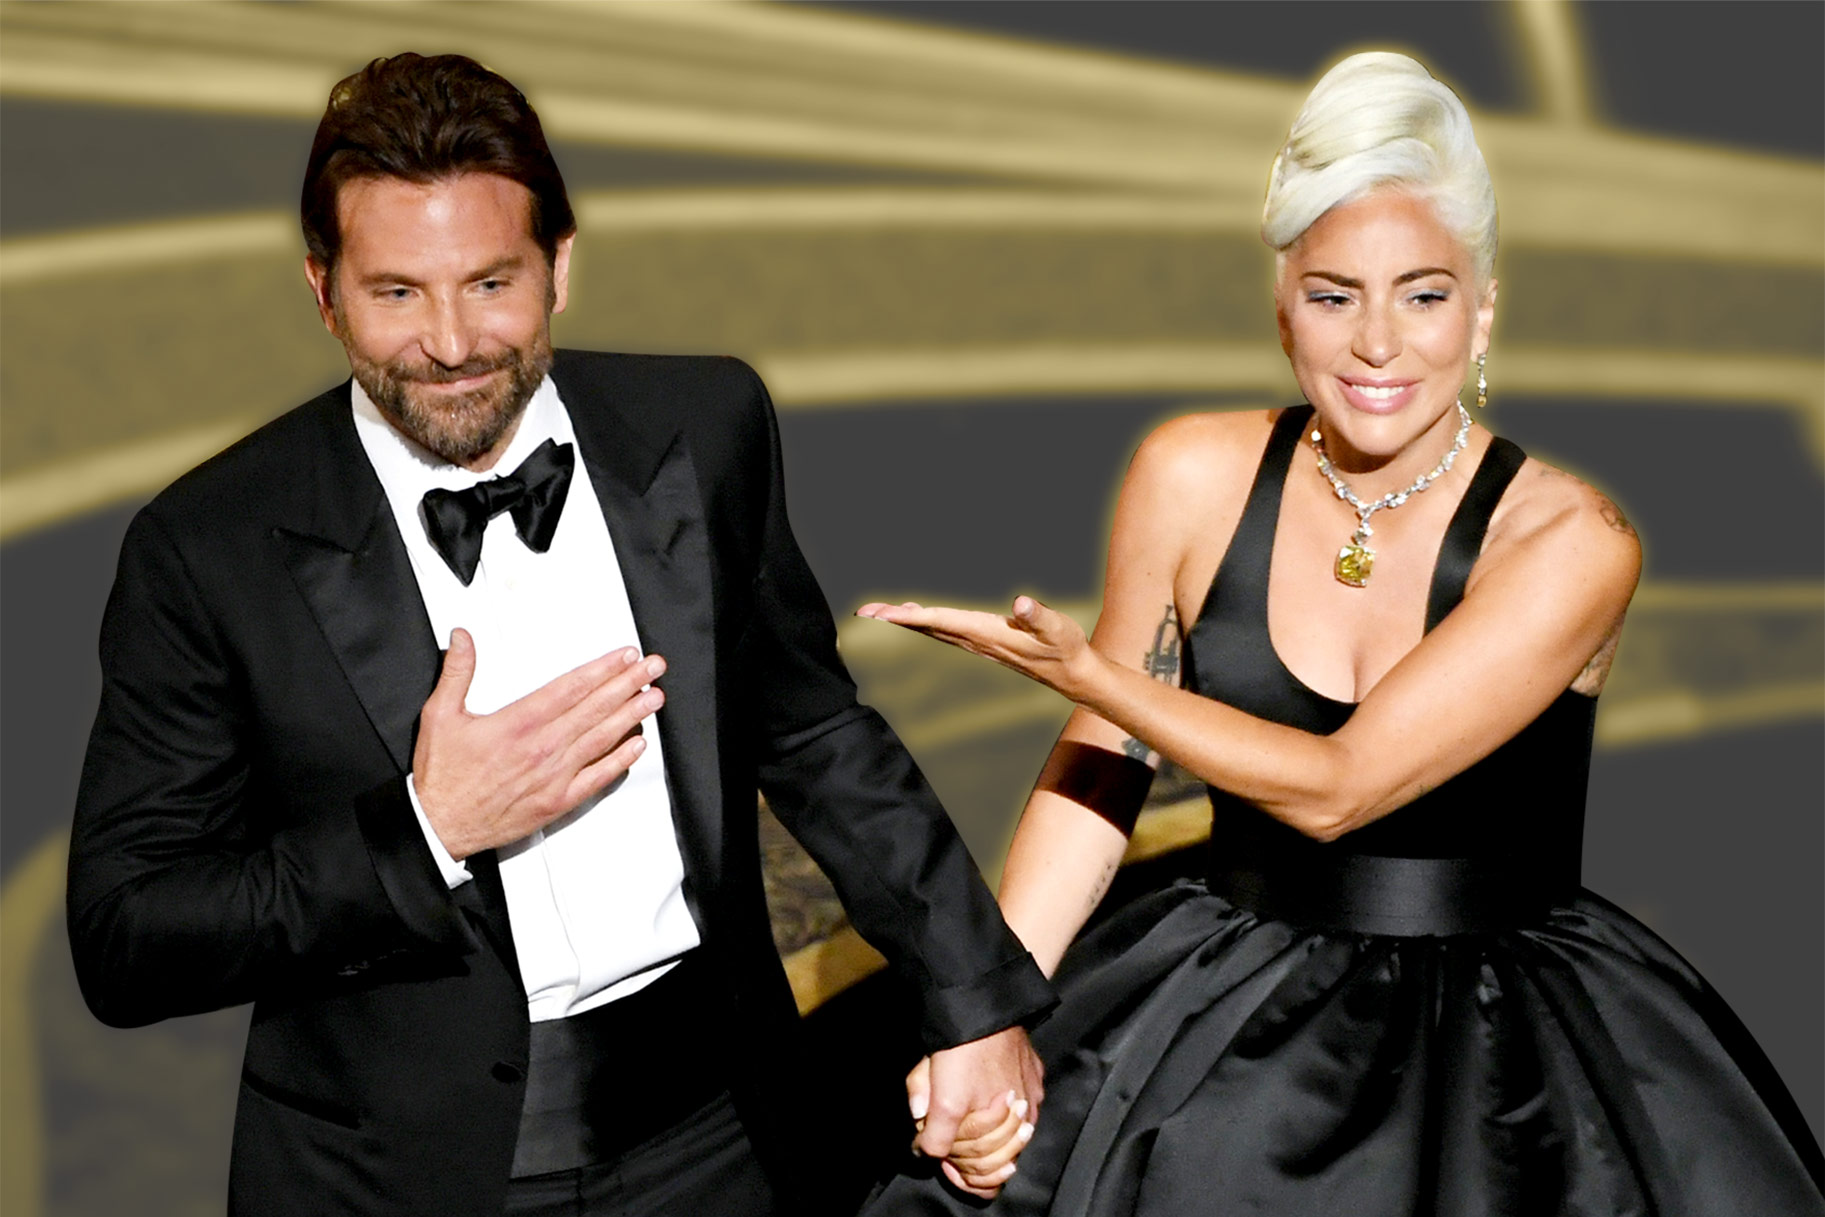 Are Lady Gaga, Bradley Cooper Dating After Irina Shayk Marriage Rumors? | Personal Space